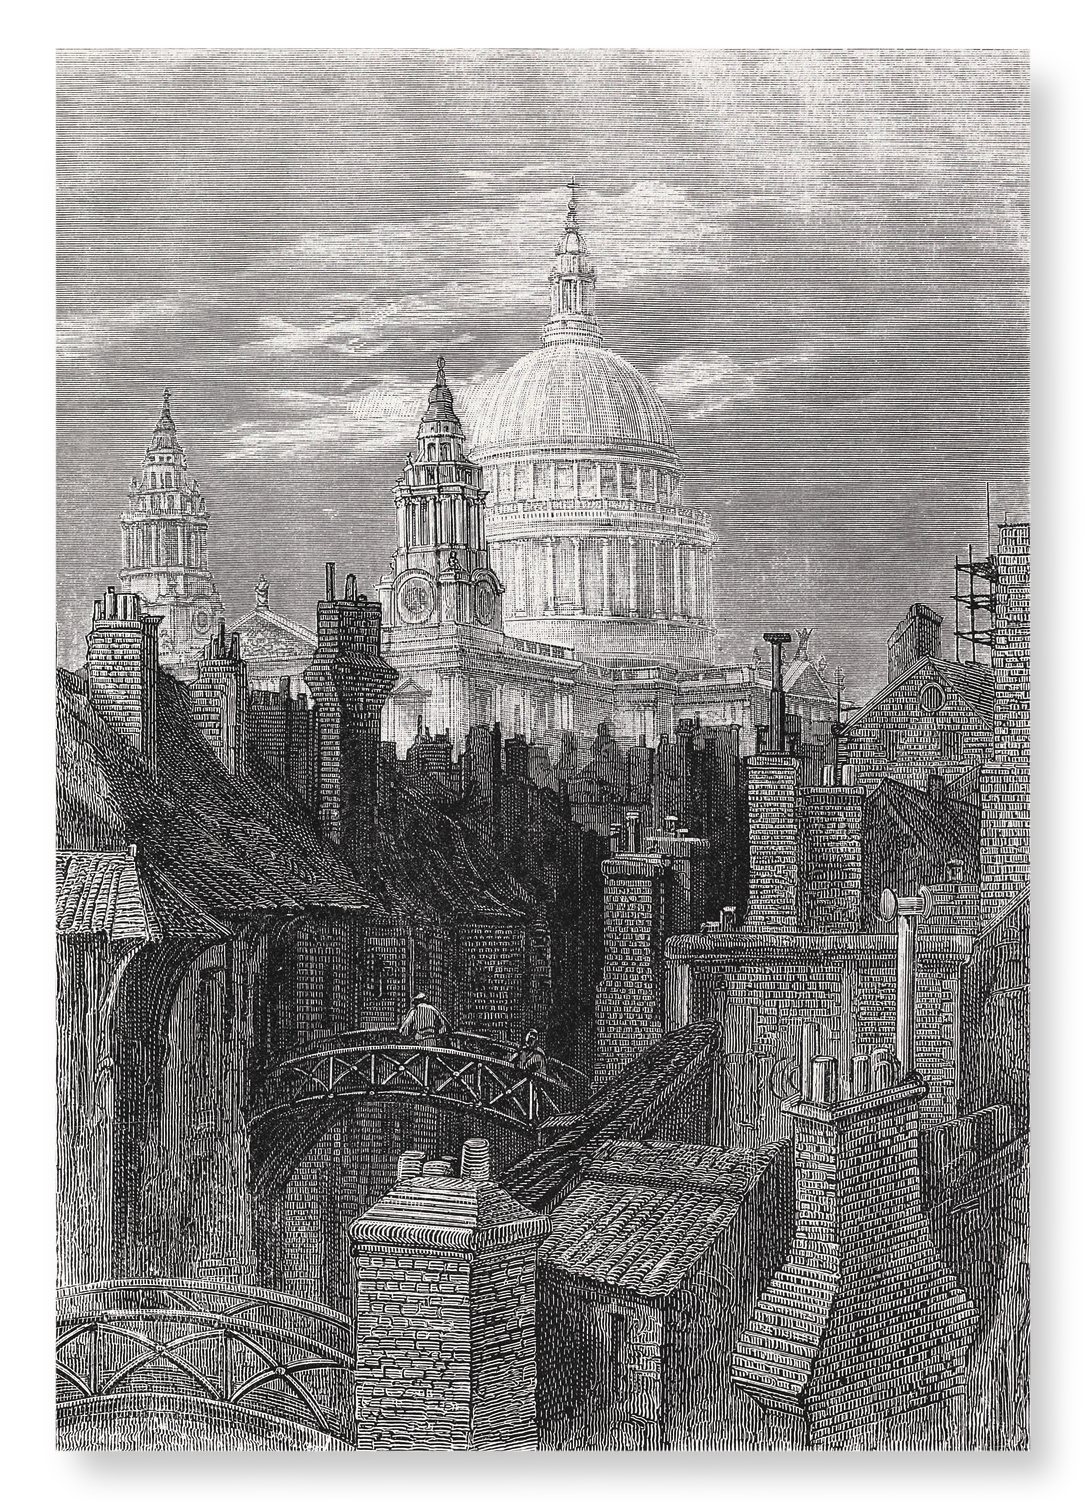 ST PAUL’S FROM THE BREWERY BRIDGE (1873)